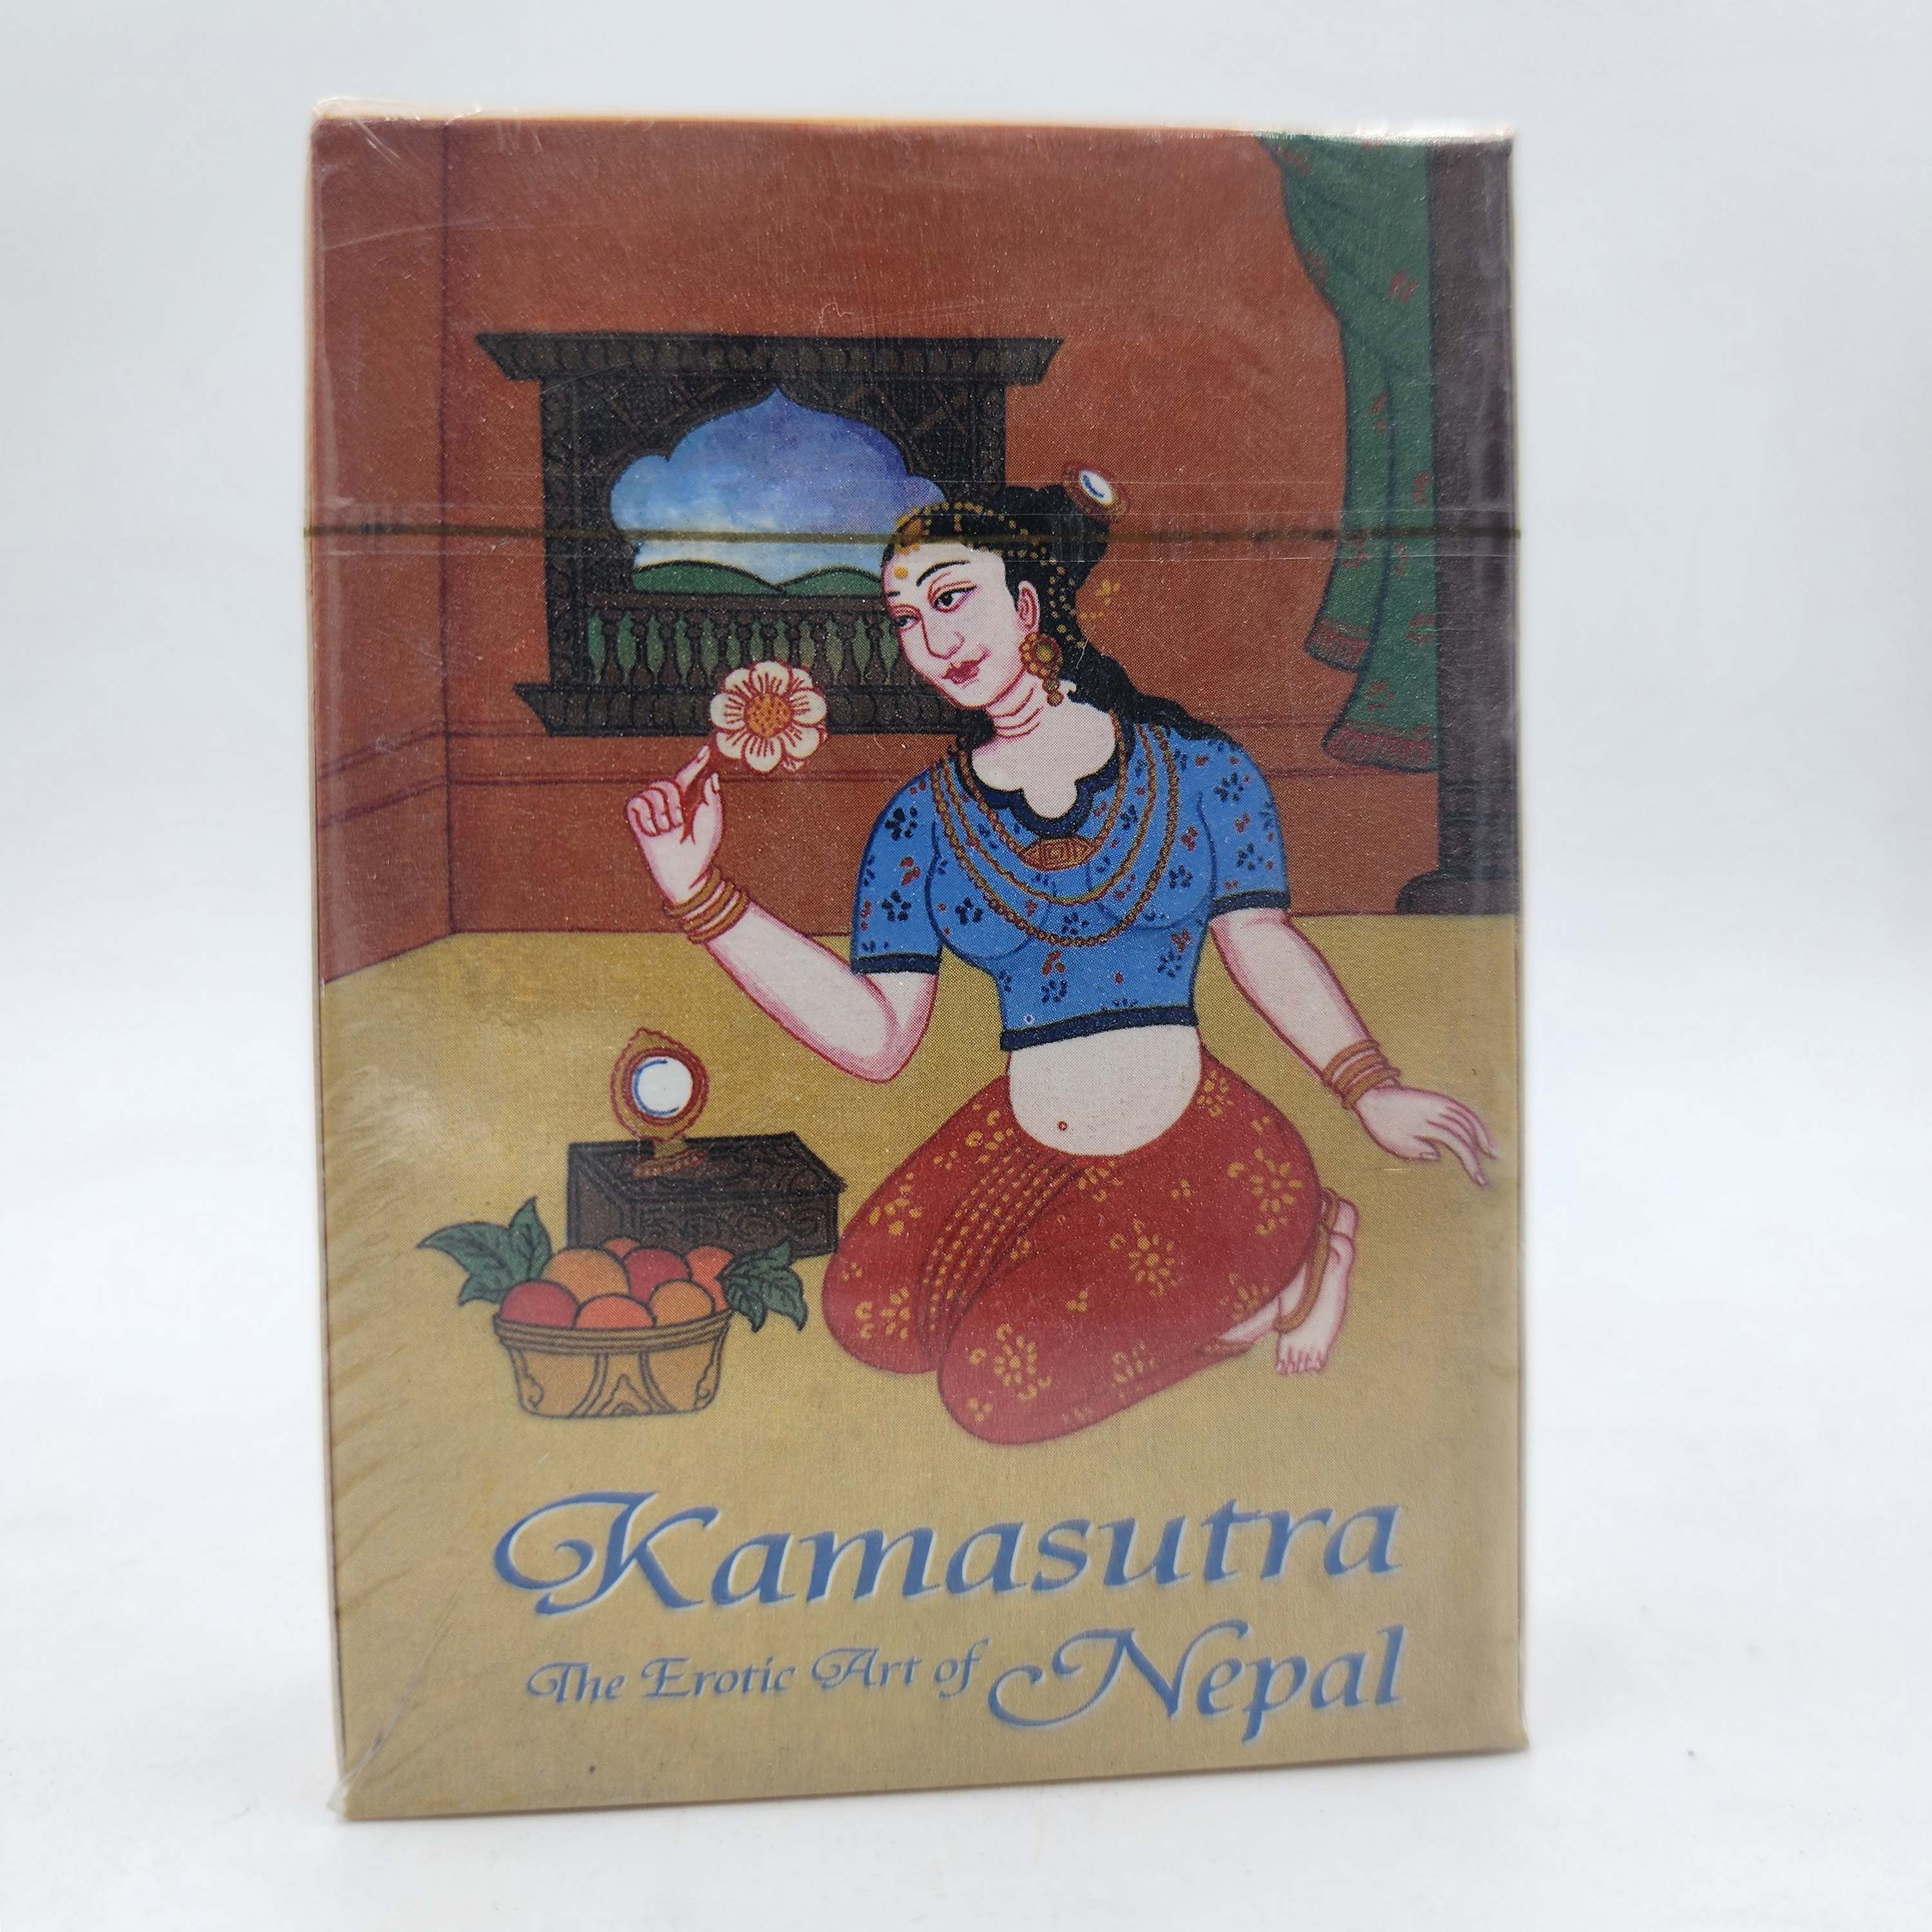 High Quality Kama Sutra Playing Cards, 52 Different Art Design